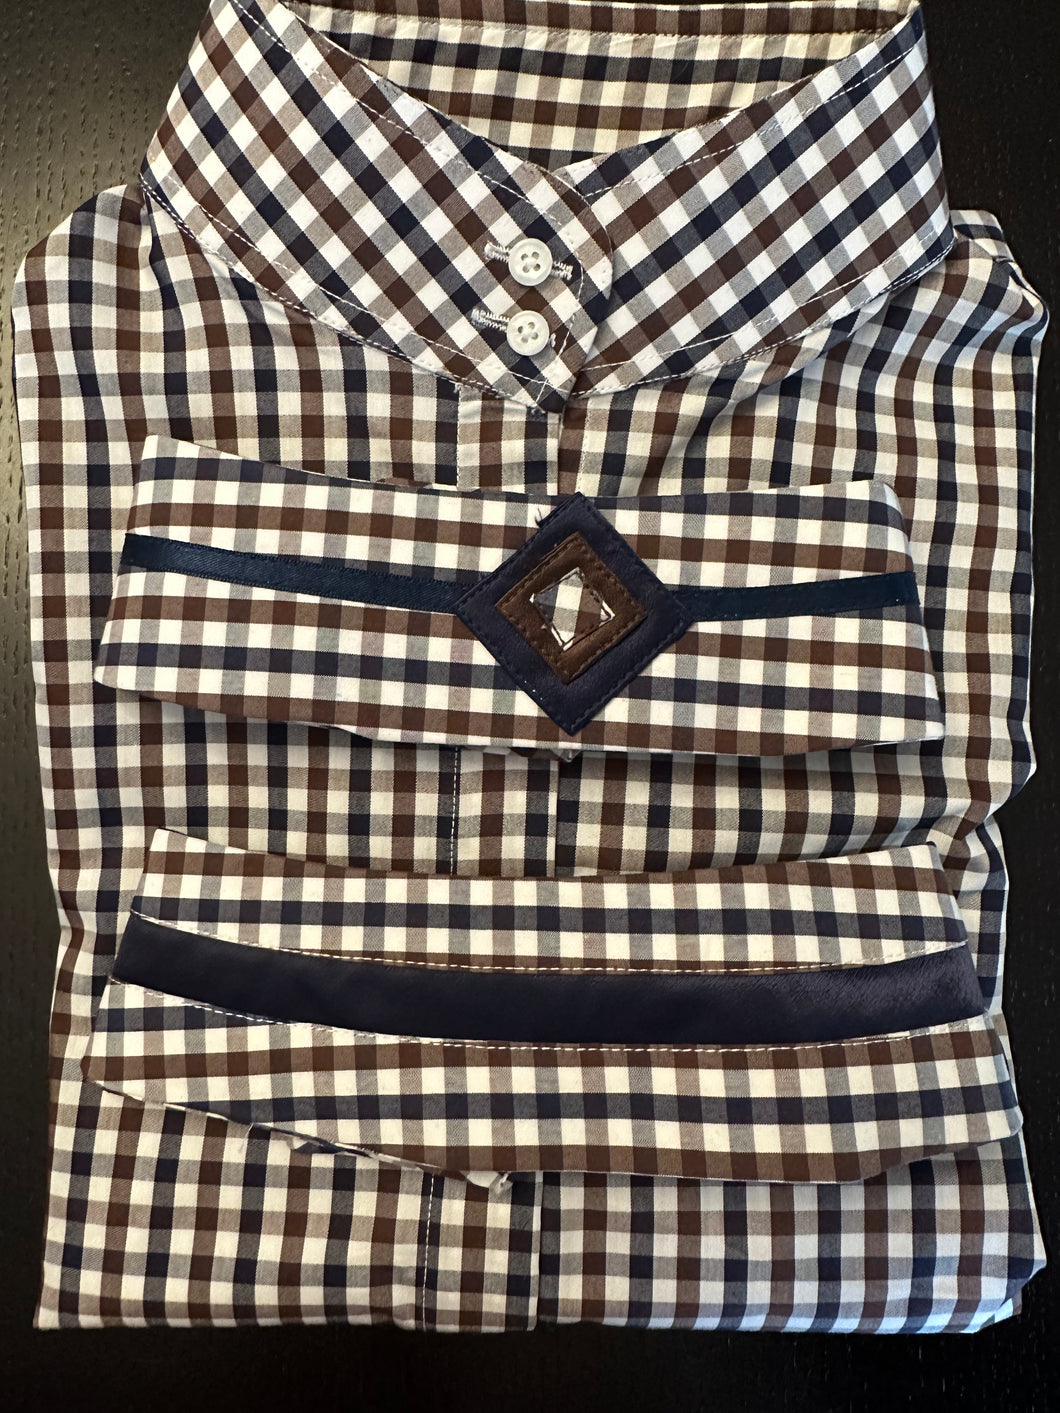 Navy & Brown Check: 2 Collars - Size 36 (3)